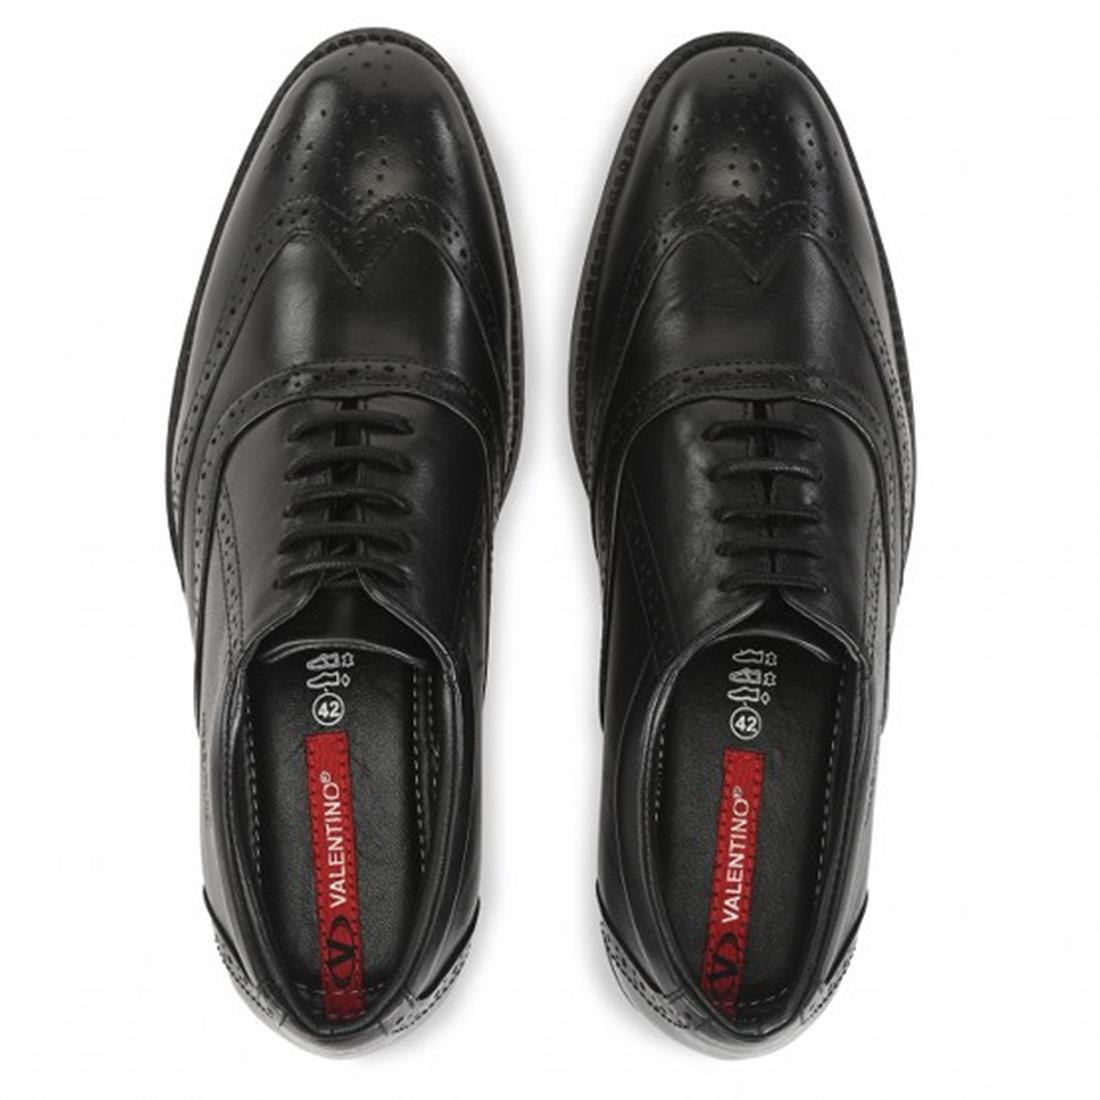 AMAZONA-70A MEN LEATHER BLACK FORMAL LACE UP BROGUE